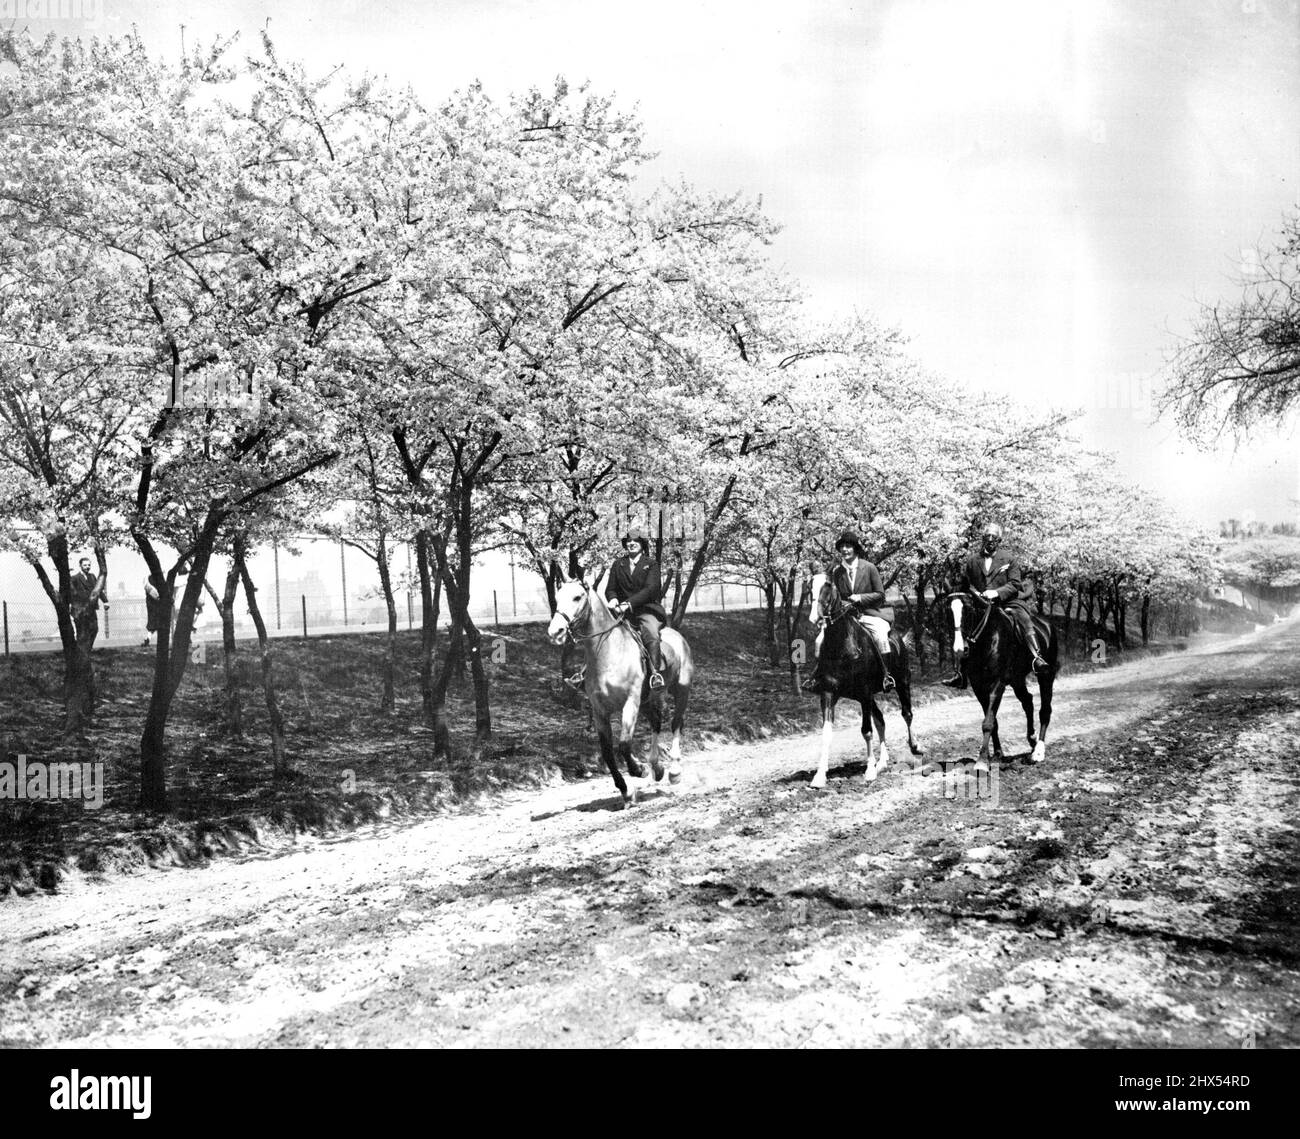 A Bit Of Japan. . . In The Heart Of New York -- These fair equestriennes in Central Park are enjoying all the thrills of Cherry Blossom in old Japan without leaving the heart of mad Manhattan. The beautiful bridle path is now lined with millions of Cherry Blossoms which reached their full SP Lendor today Monday. June 17, 1931. Stock Photo